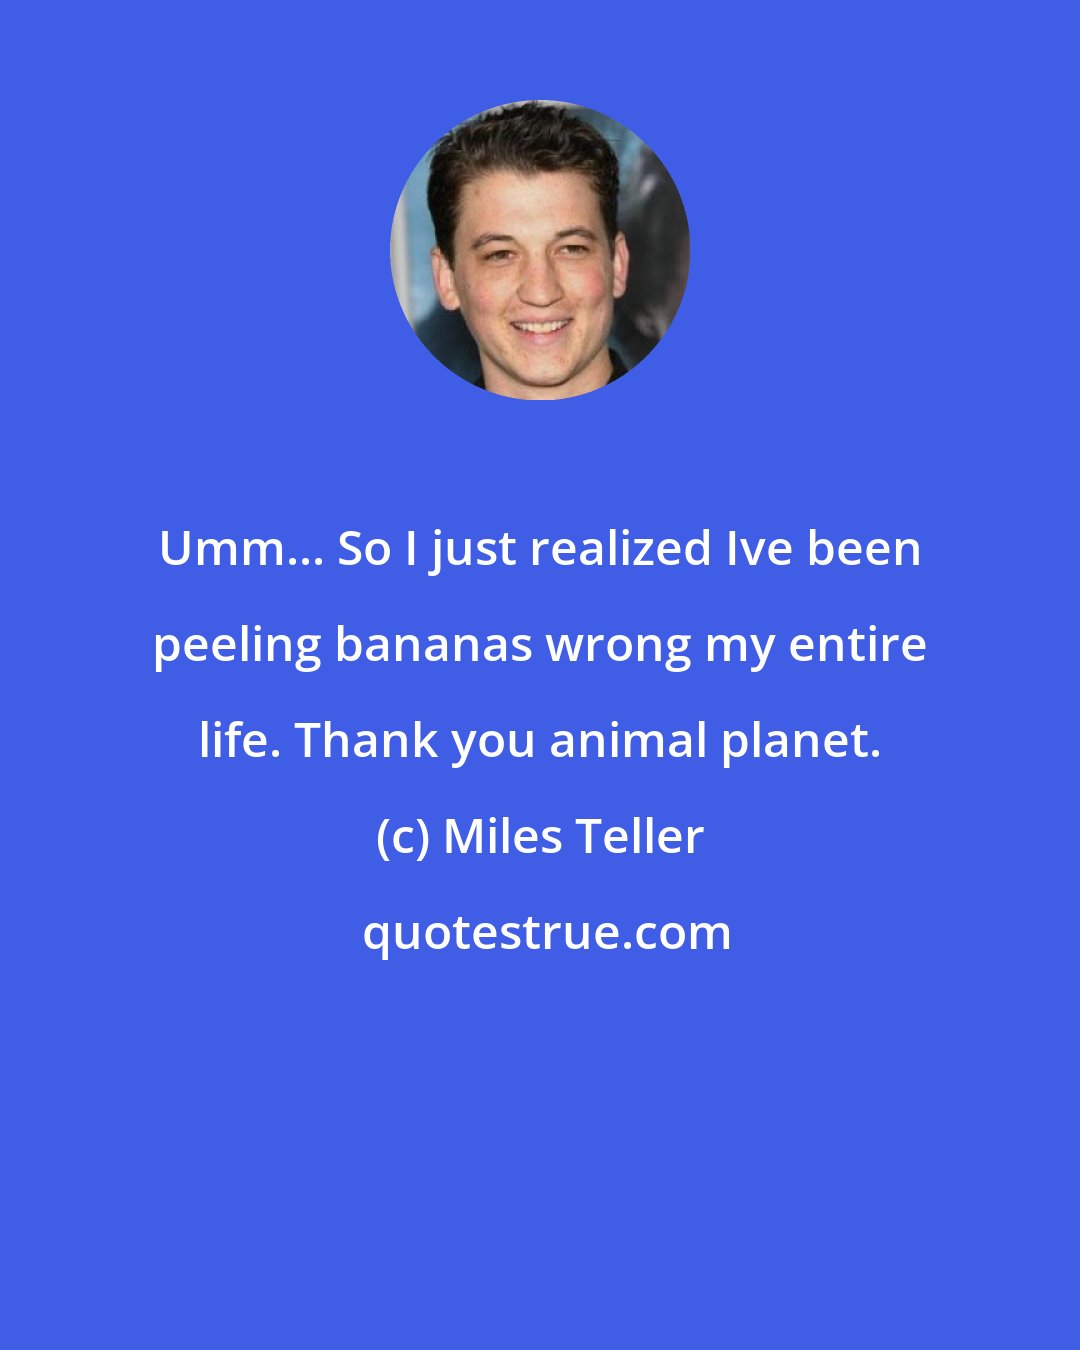 Miles Teller: Umm... So I just realized Ive been peeling bananas wrong my entire life. Thank you animal planet.